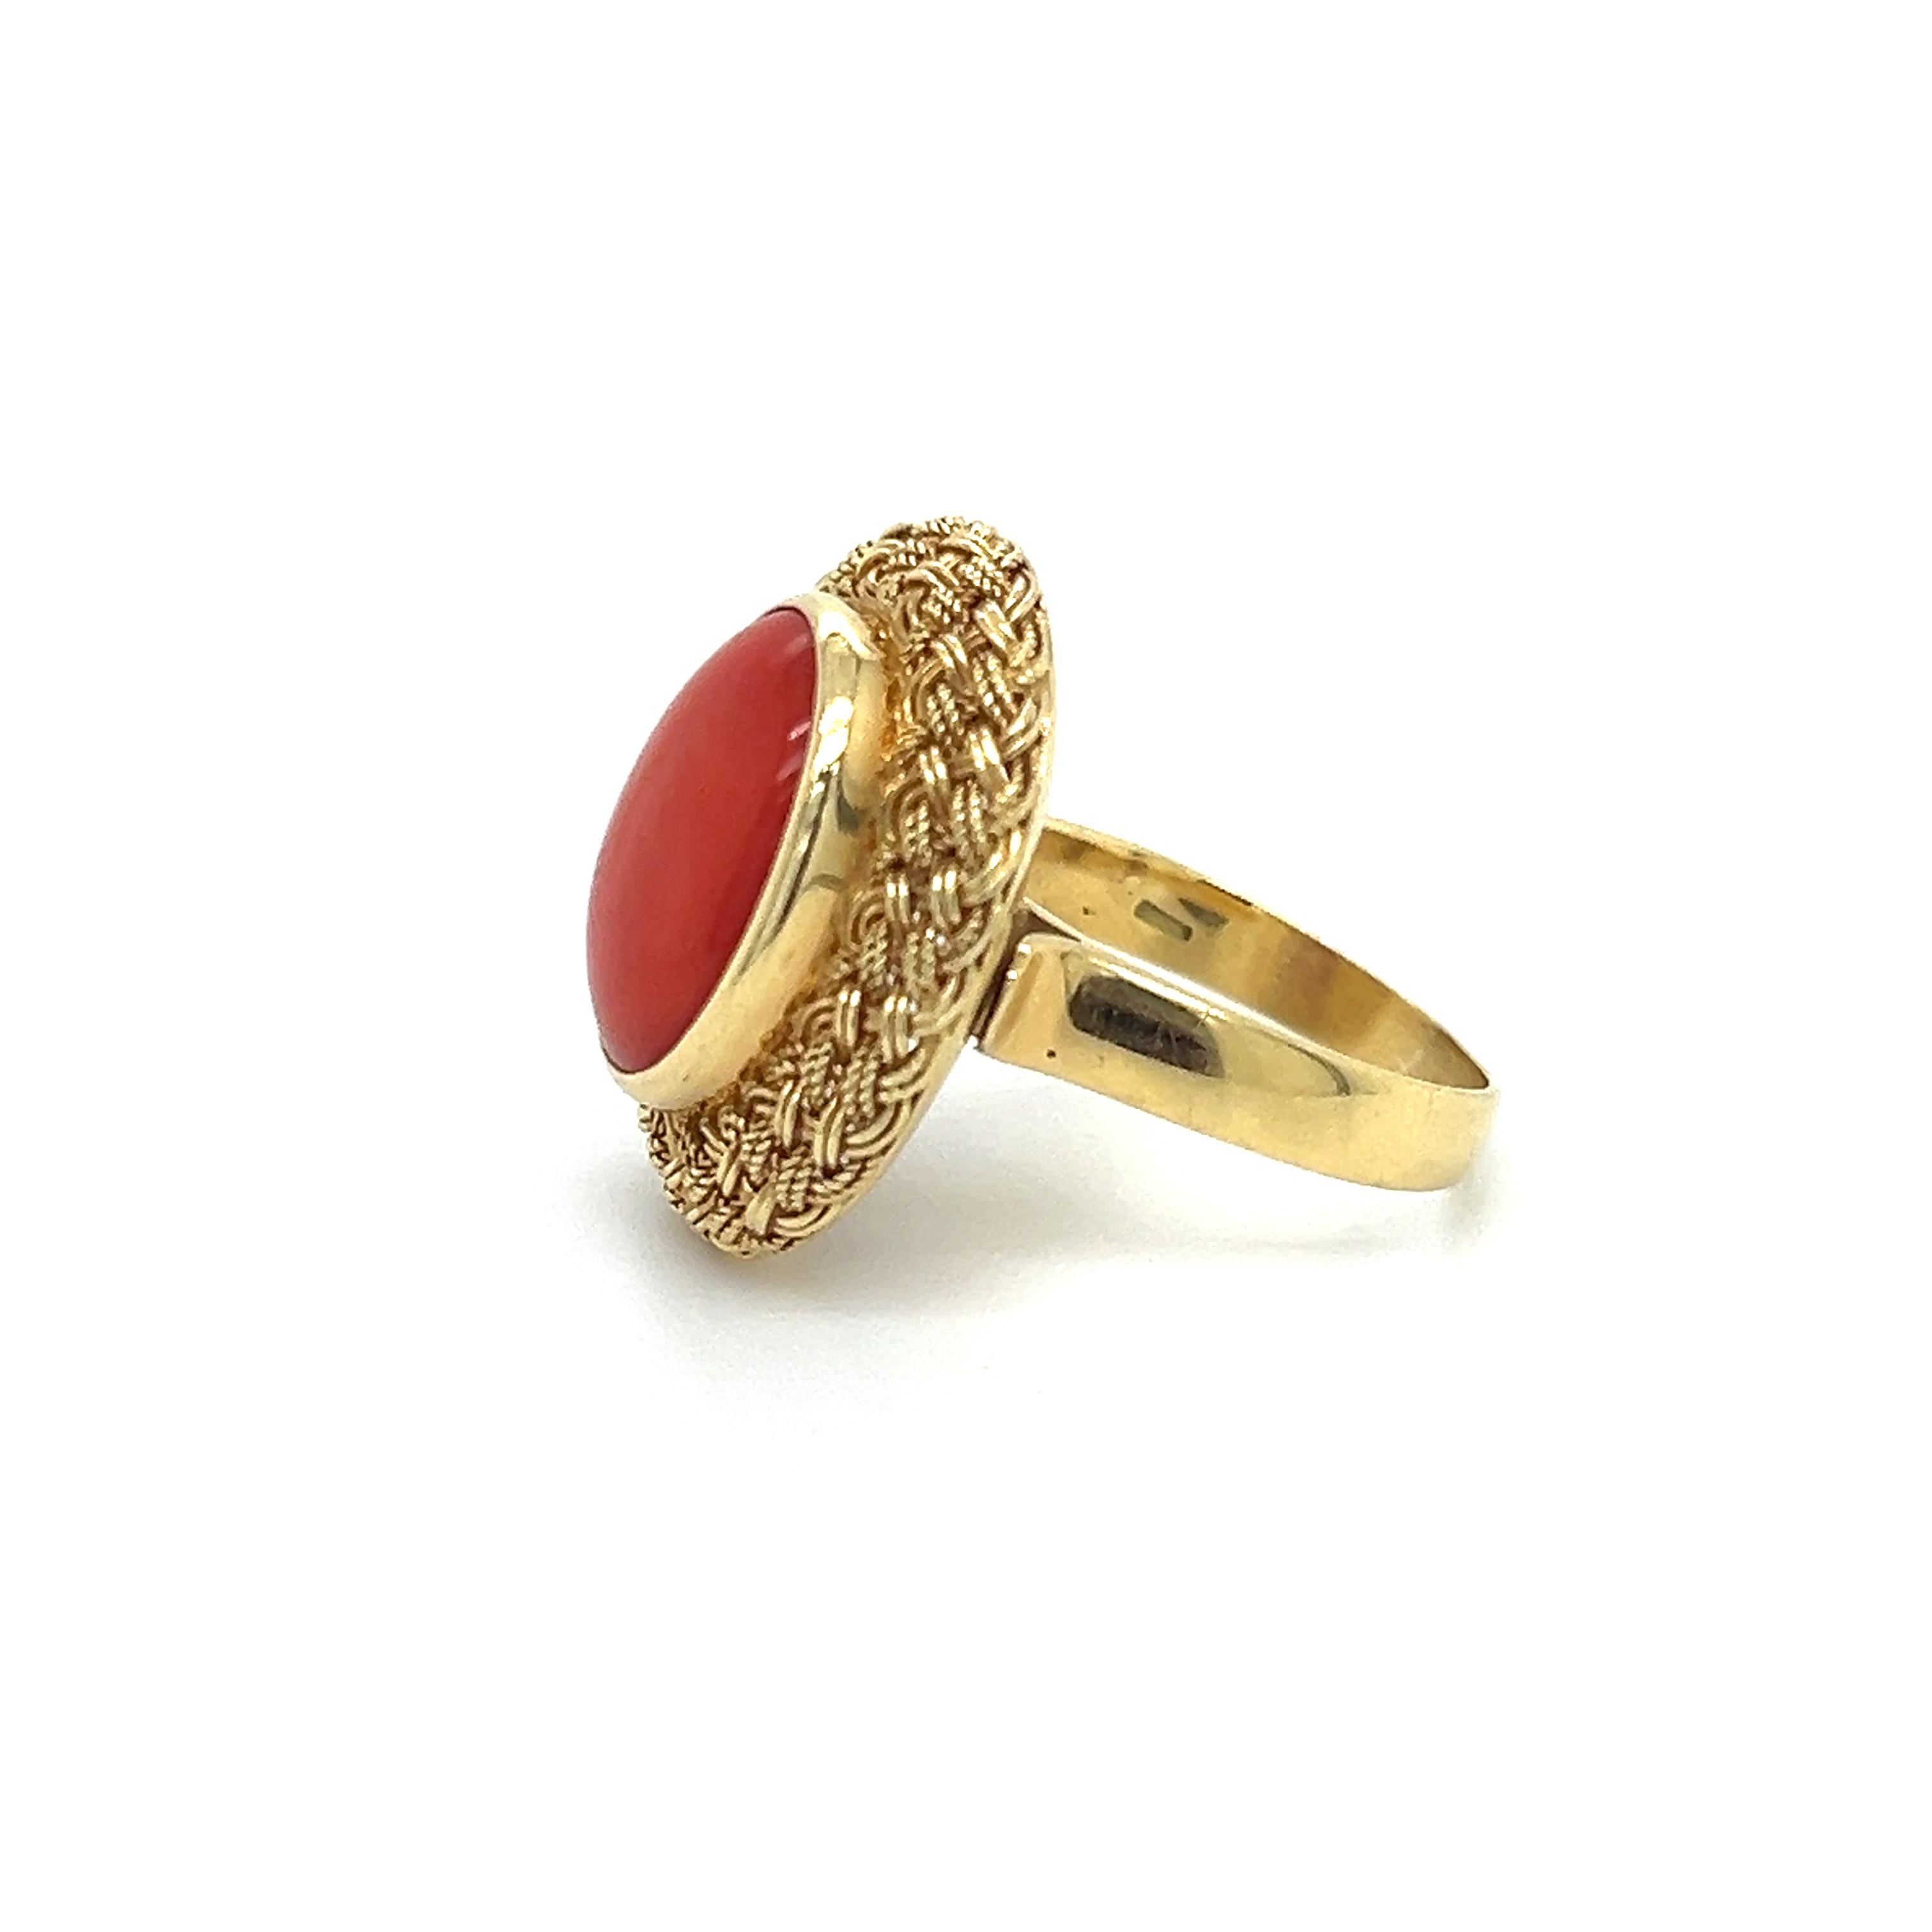 Cabochon Retro Coral Gemstone 18k Yellow Gold Cocktail Ring For Sale